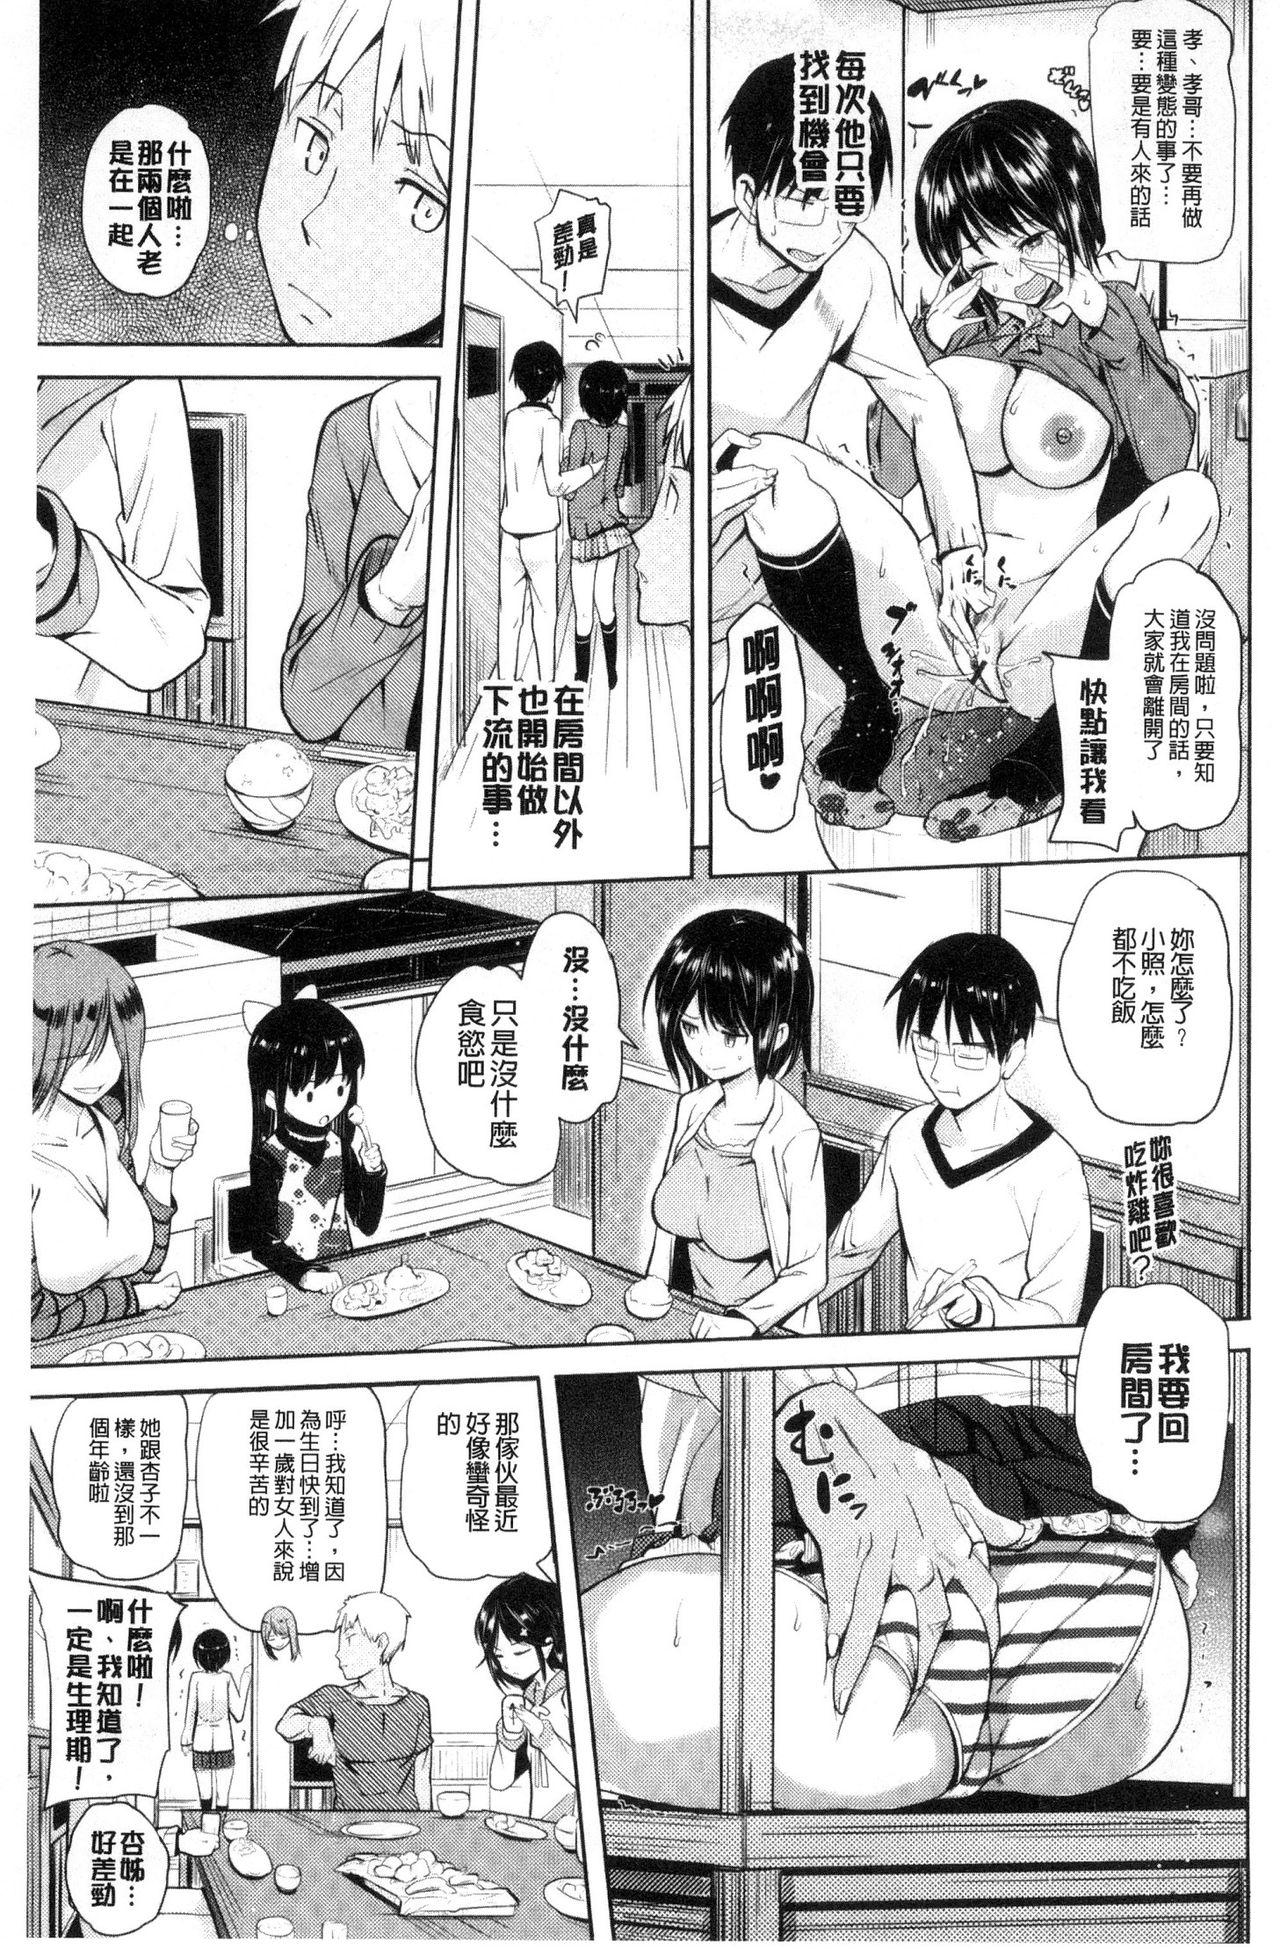 [Knuckle Curve] Onii-chan Kanshasai - Sexgiving Day | 大哥哥的感謝祭♡ [Chinese] 66